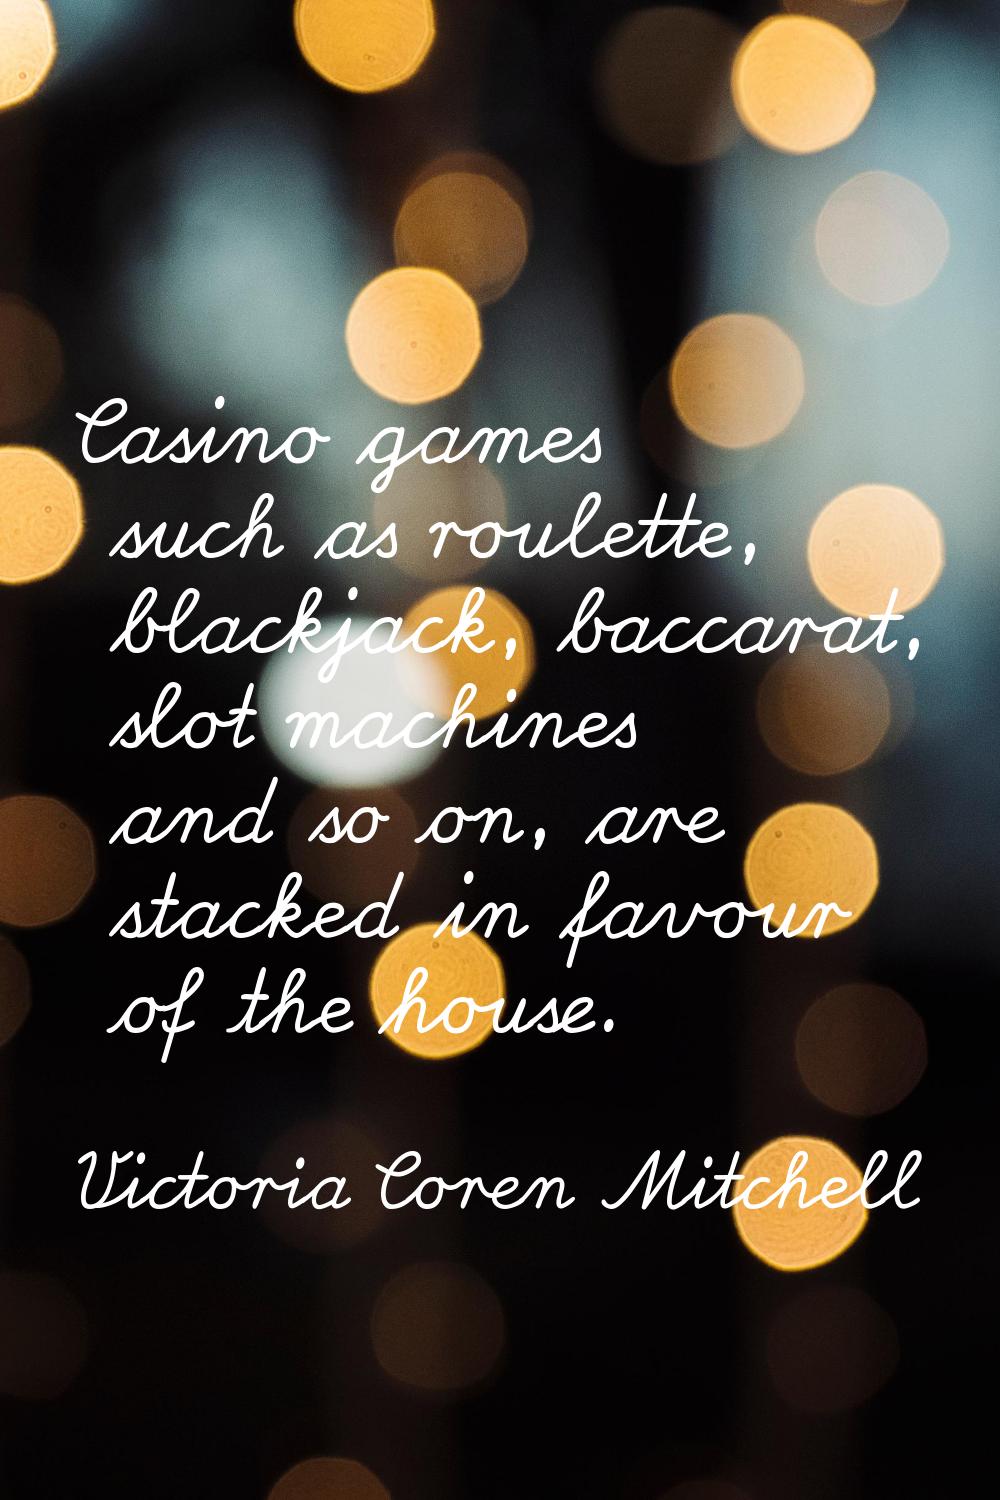 Casino games such as roulette, blackjack, baccarat, slot machines and so on, are stacked in favour 